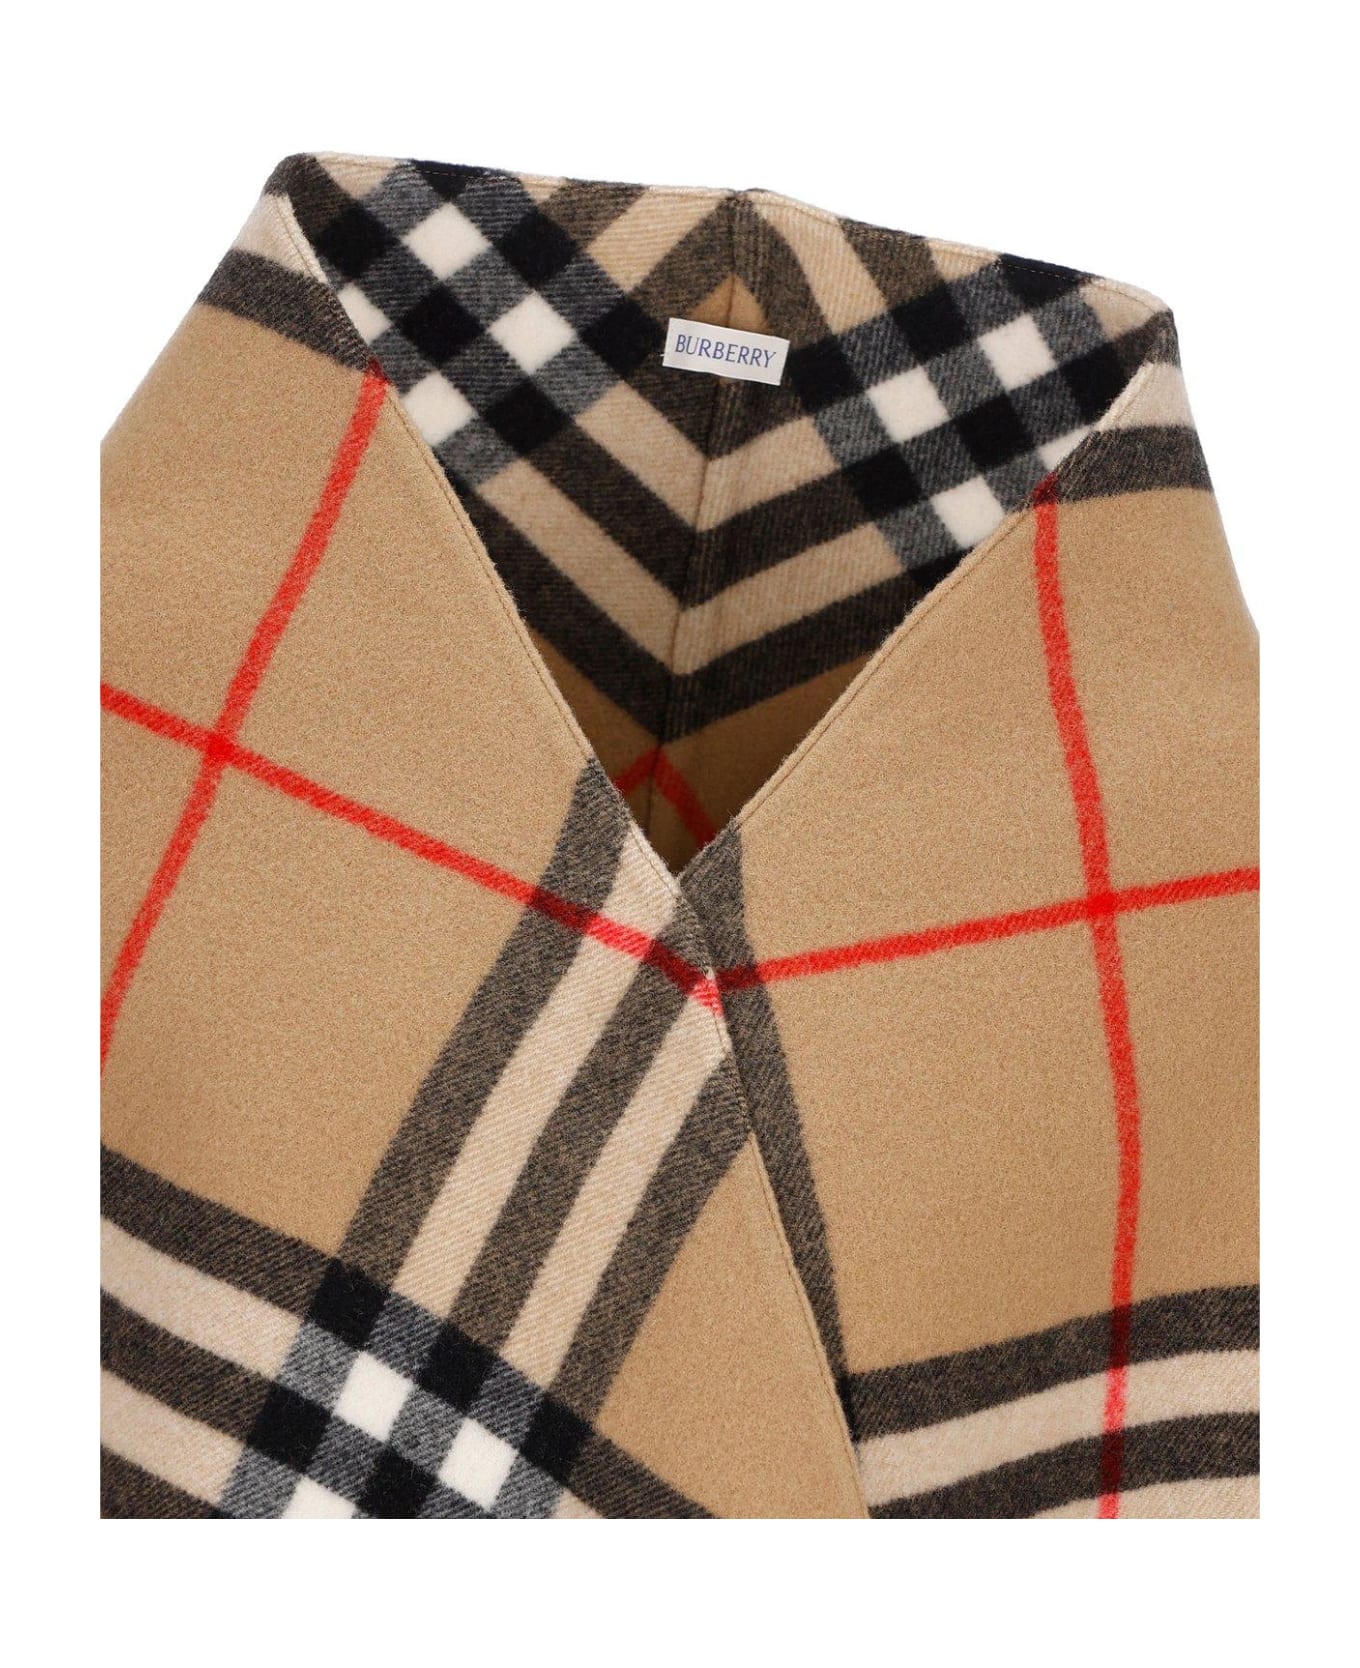 Burberry Check Printed Fringed Cape - Archive Beige